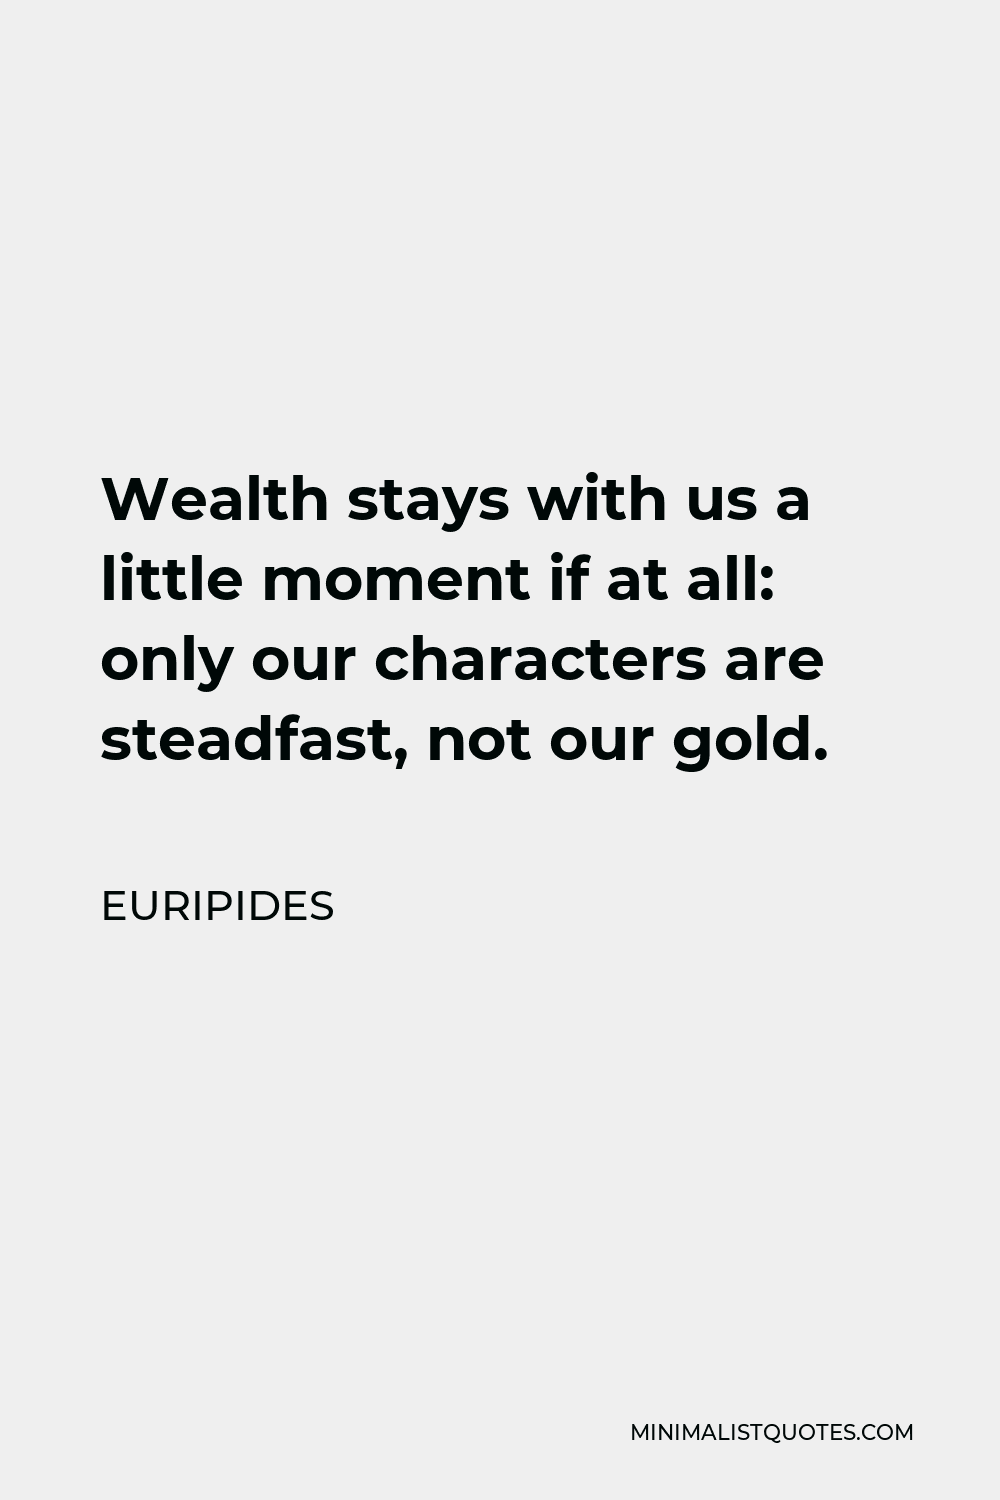 Euripides Quote - Wealth stays with us a little moment if at all: only our characters are steadfast, not our gold.